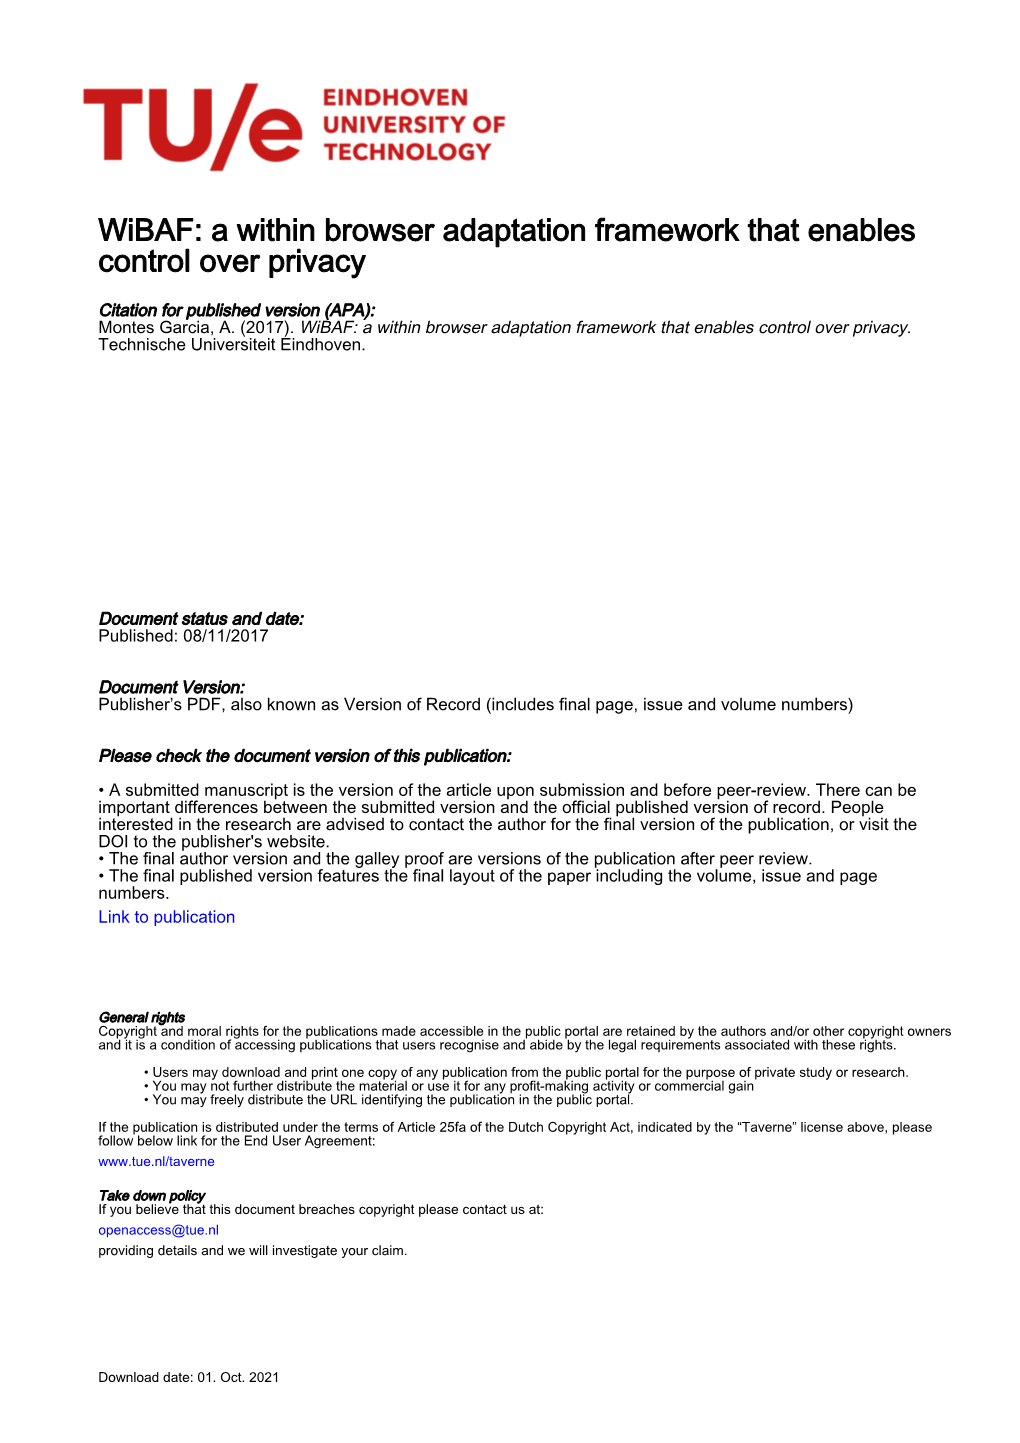 Wibaf: a Within Browser Adaptation Framework That Enables Control Over Privacy